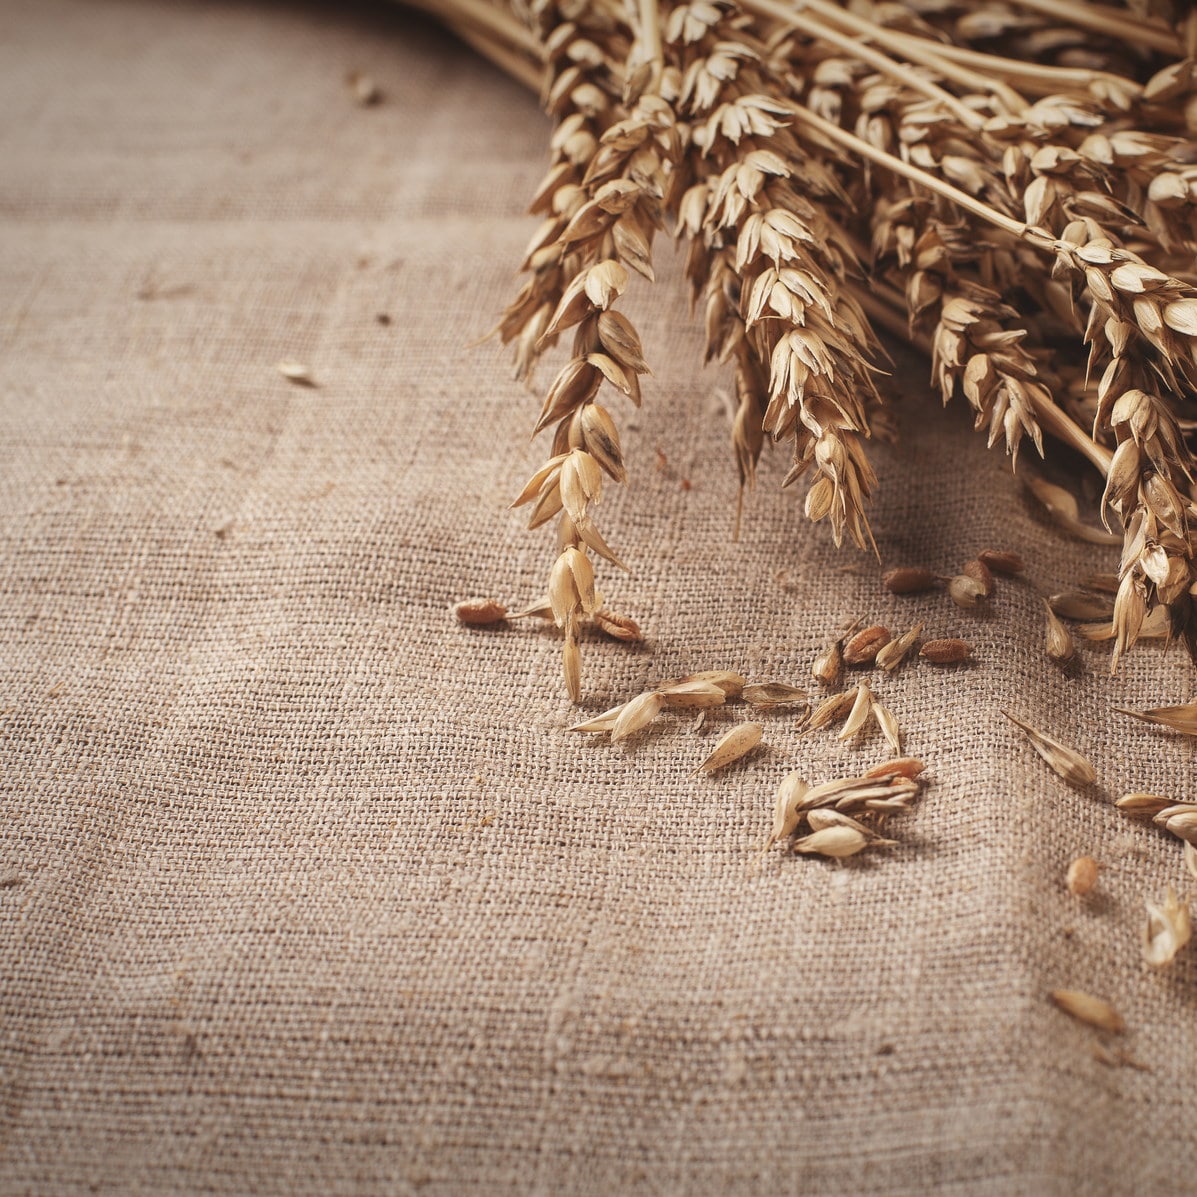 What is Jute Fabric: Properties, How its Made and Where